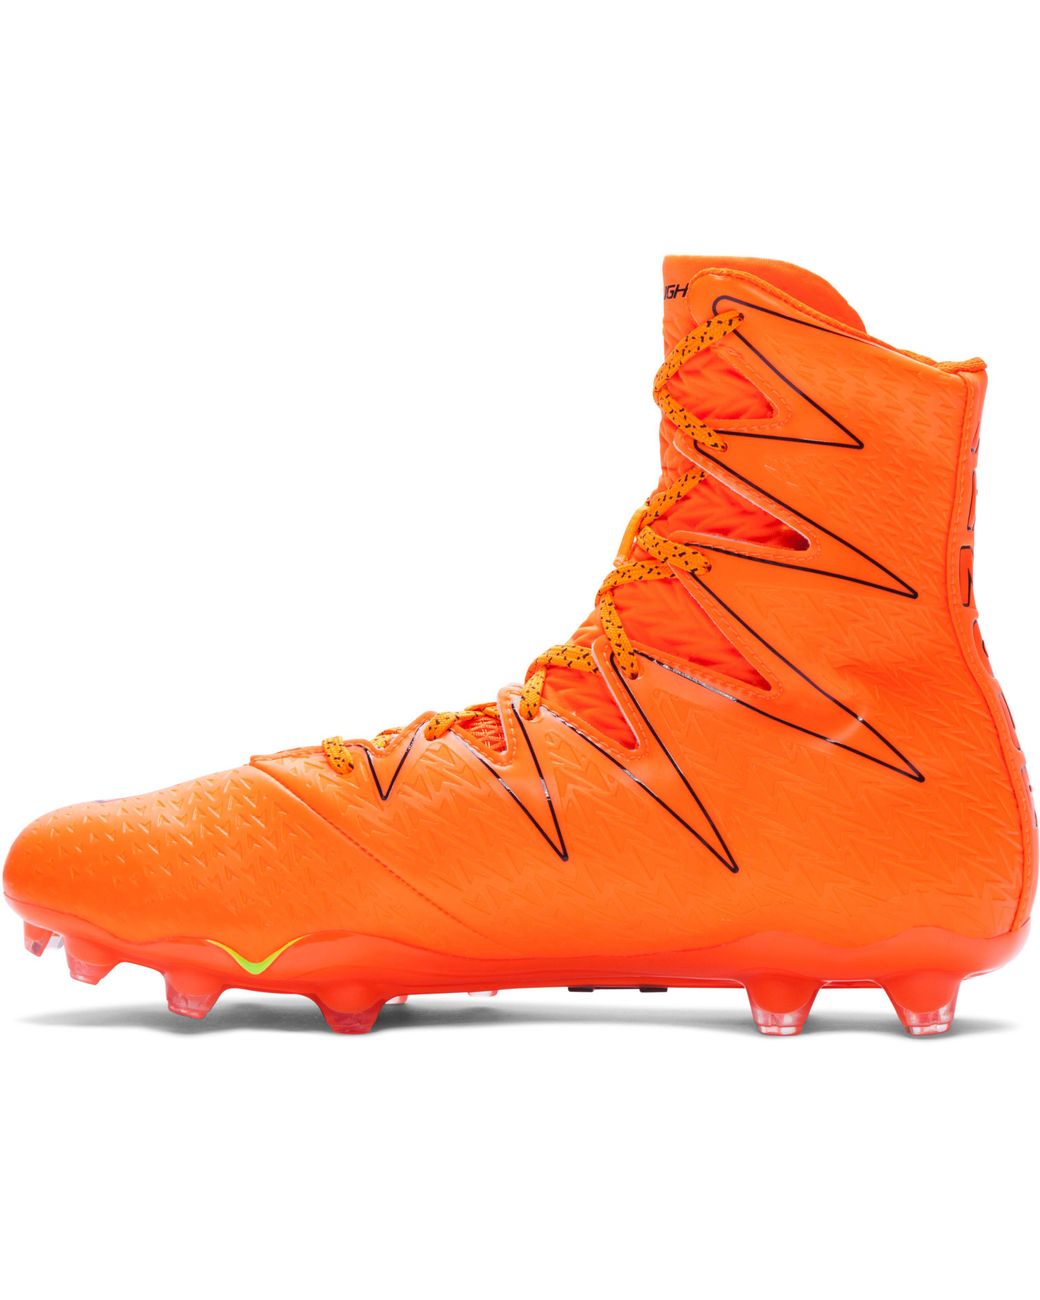 Under Armour Men's Ua Highlight Football Cleats – Limited Edition for Men |  Lyst